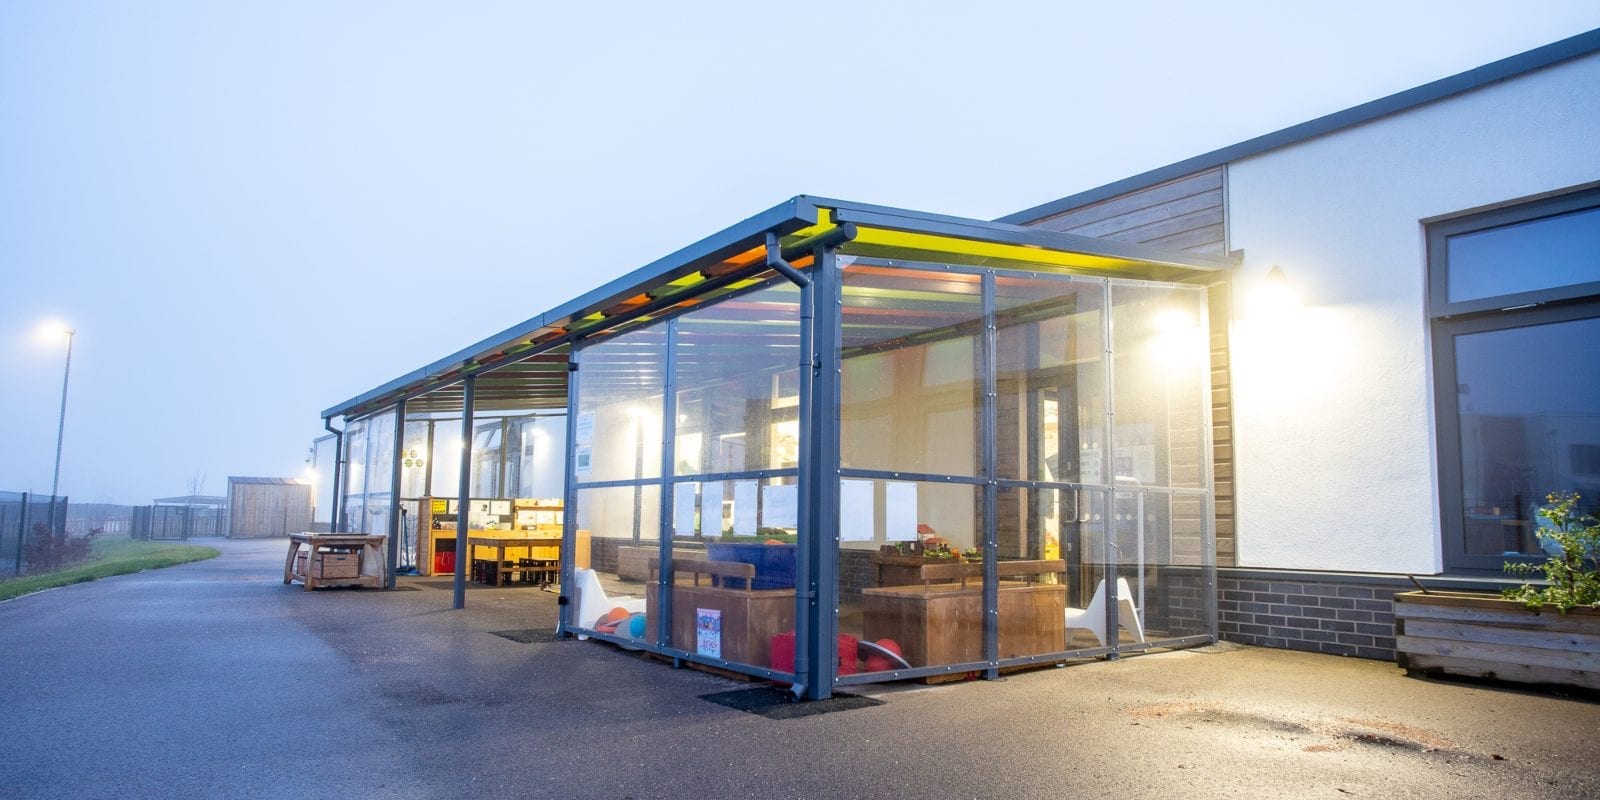 Enclosed shelter we installed at Monksmoor Park Primary School